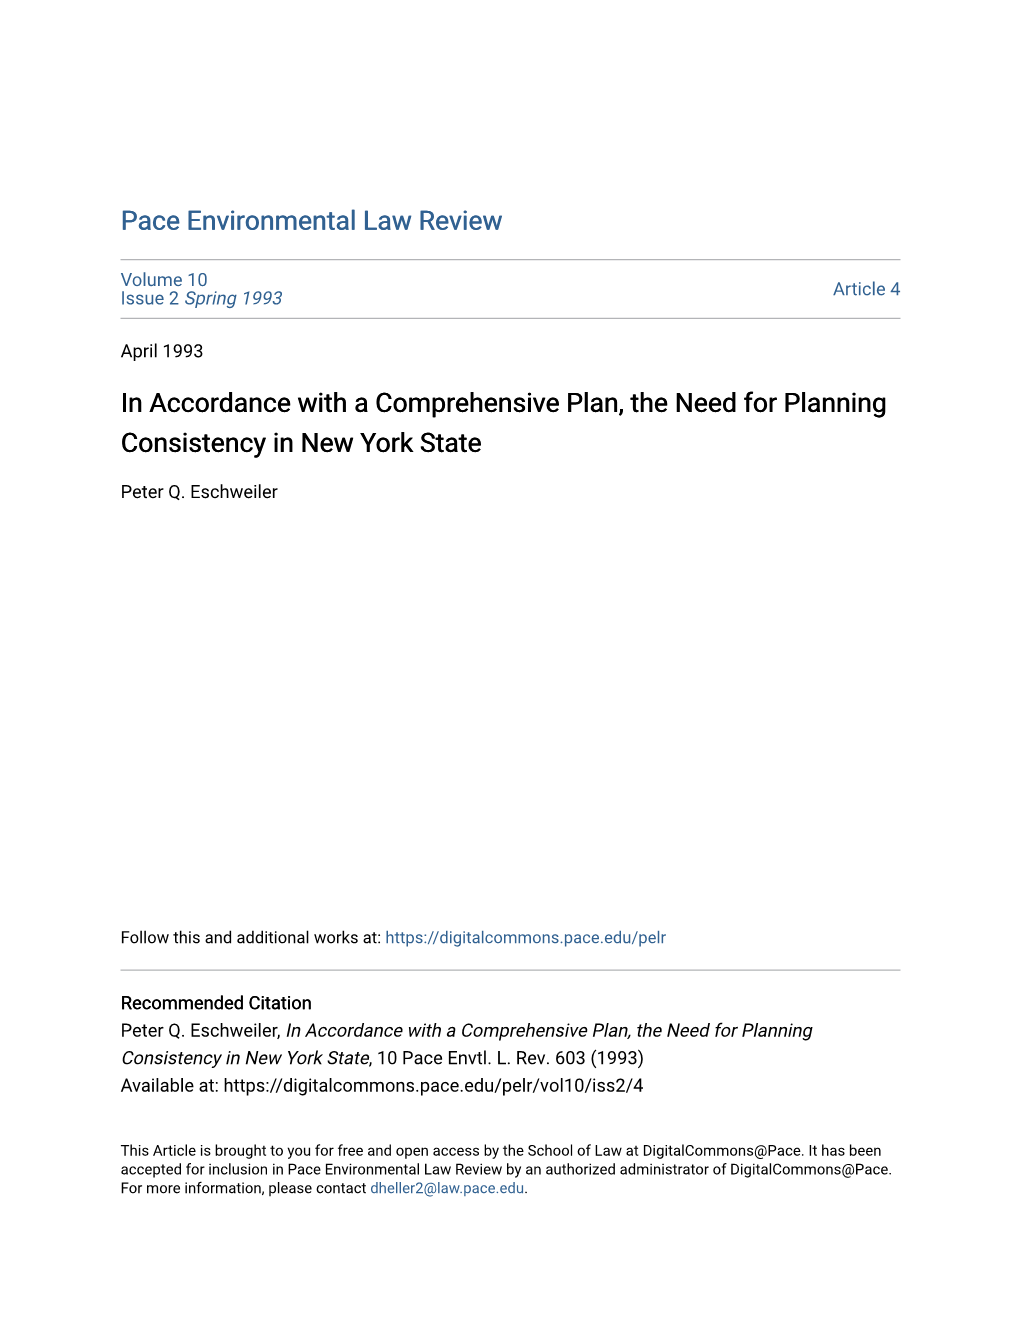 In Accordance with a Comprehensive Plan, the Need for Planning Consistency in New York State